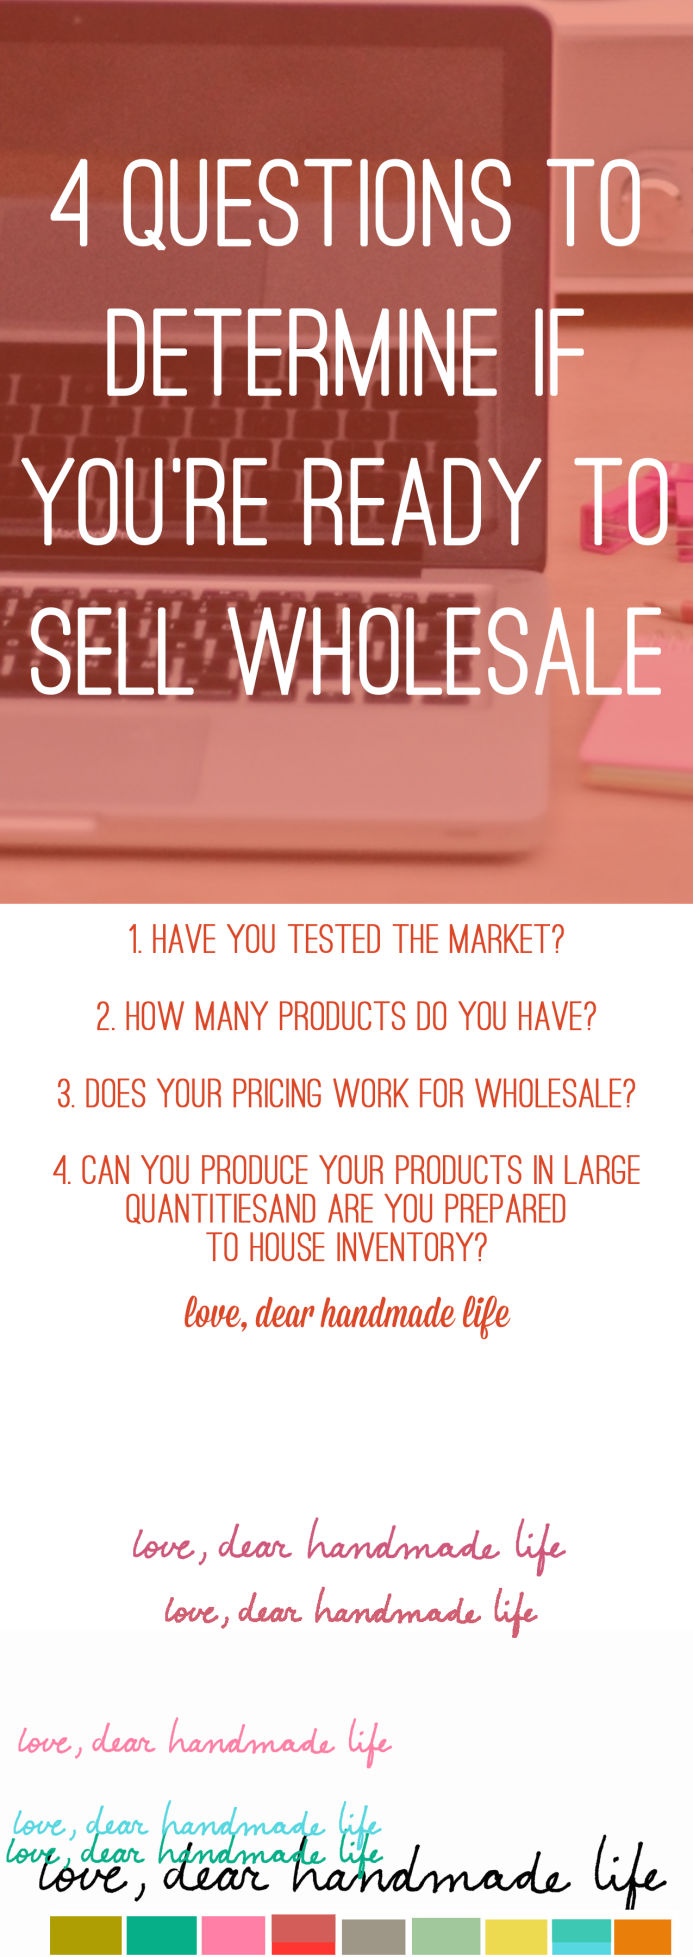 4 questions to determine if you’re ready to sell wholesale from Dear Handmade Life